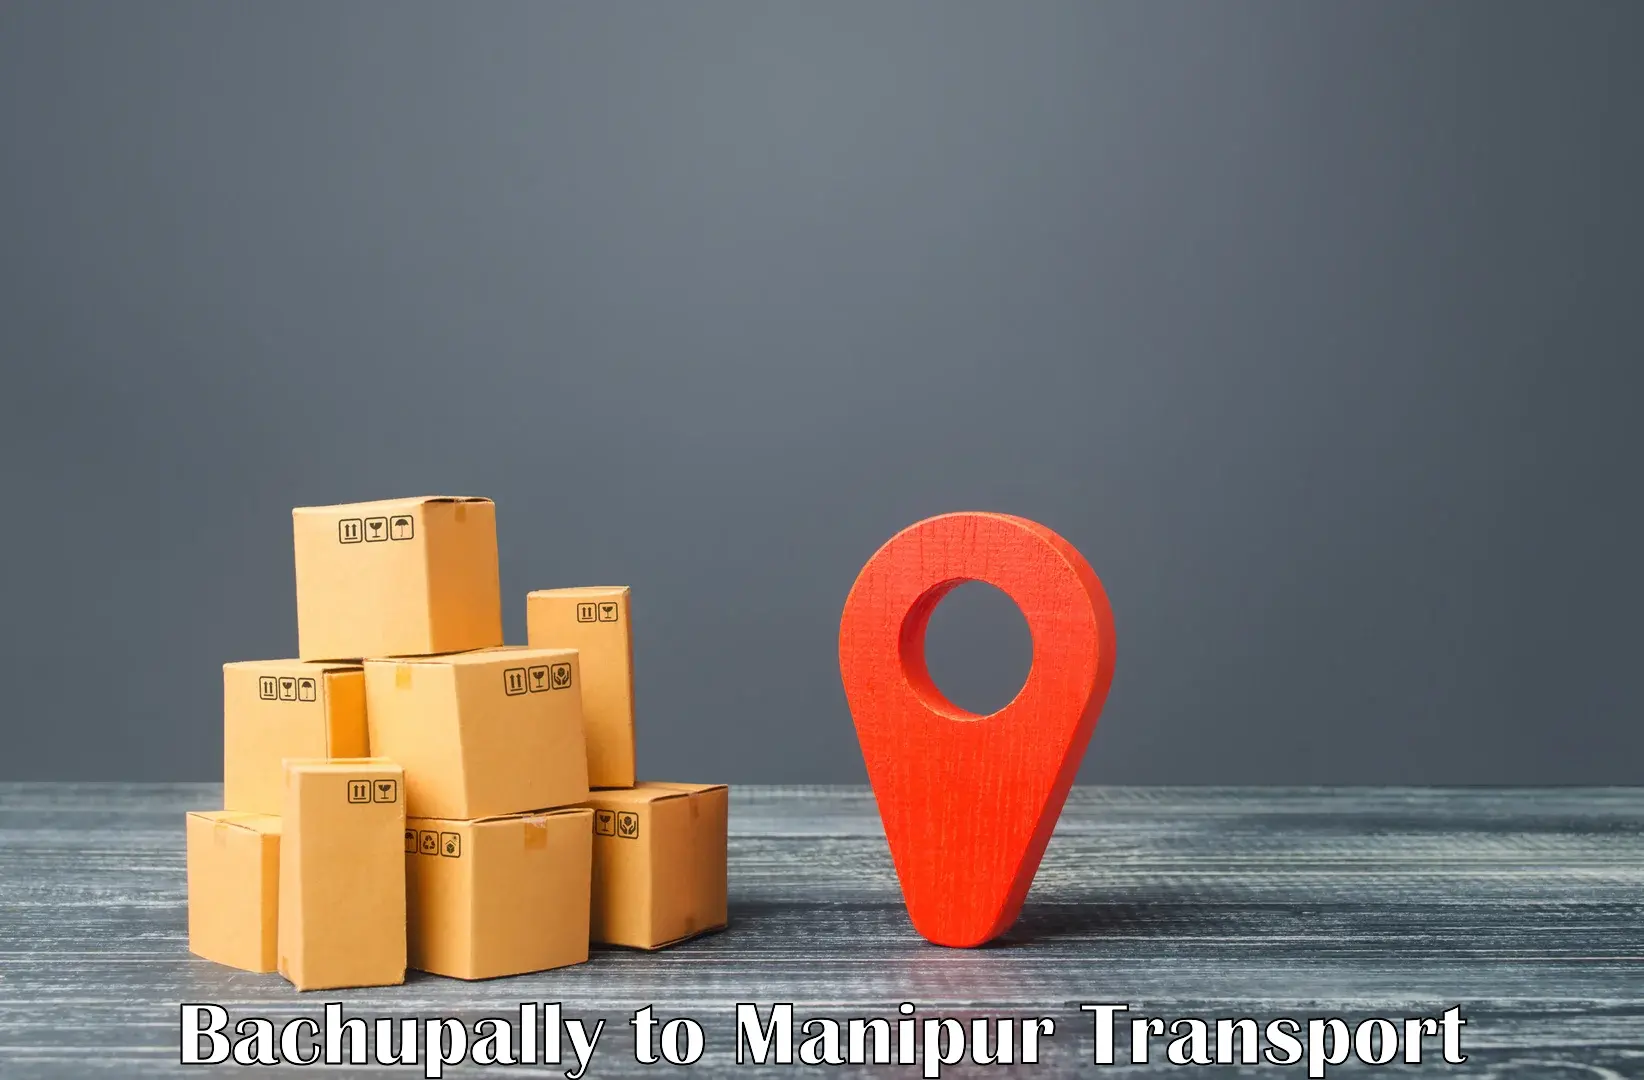 Air cargo transport services Bachupally to Manipur